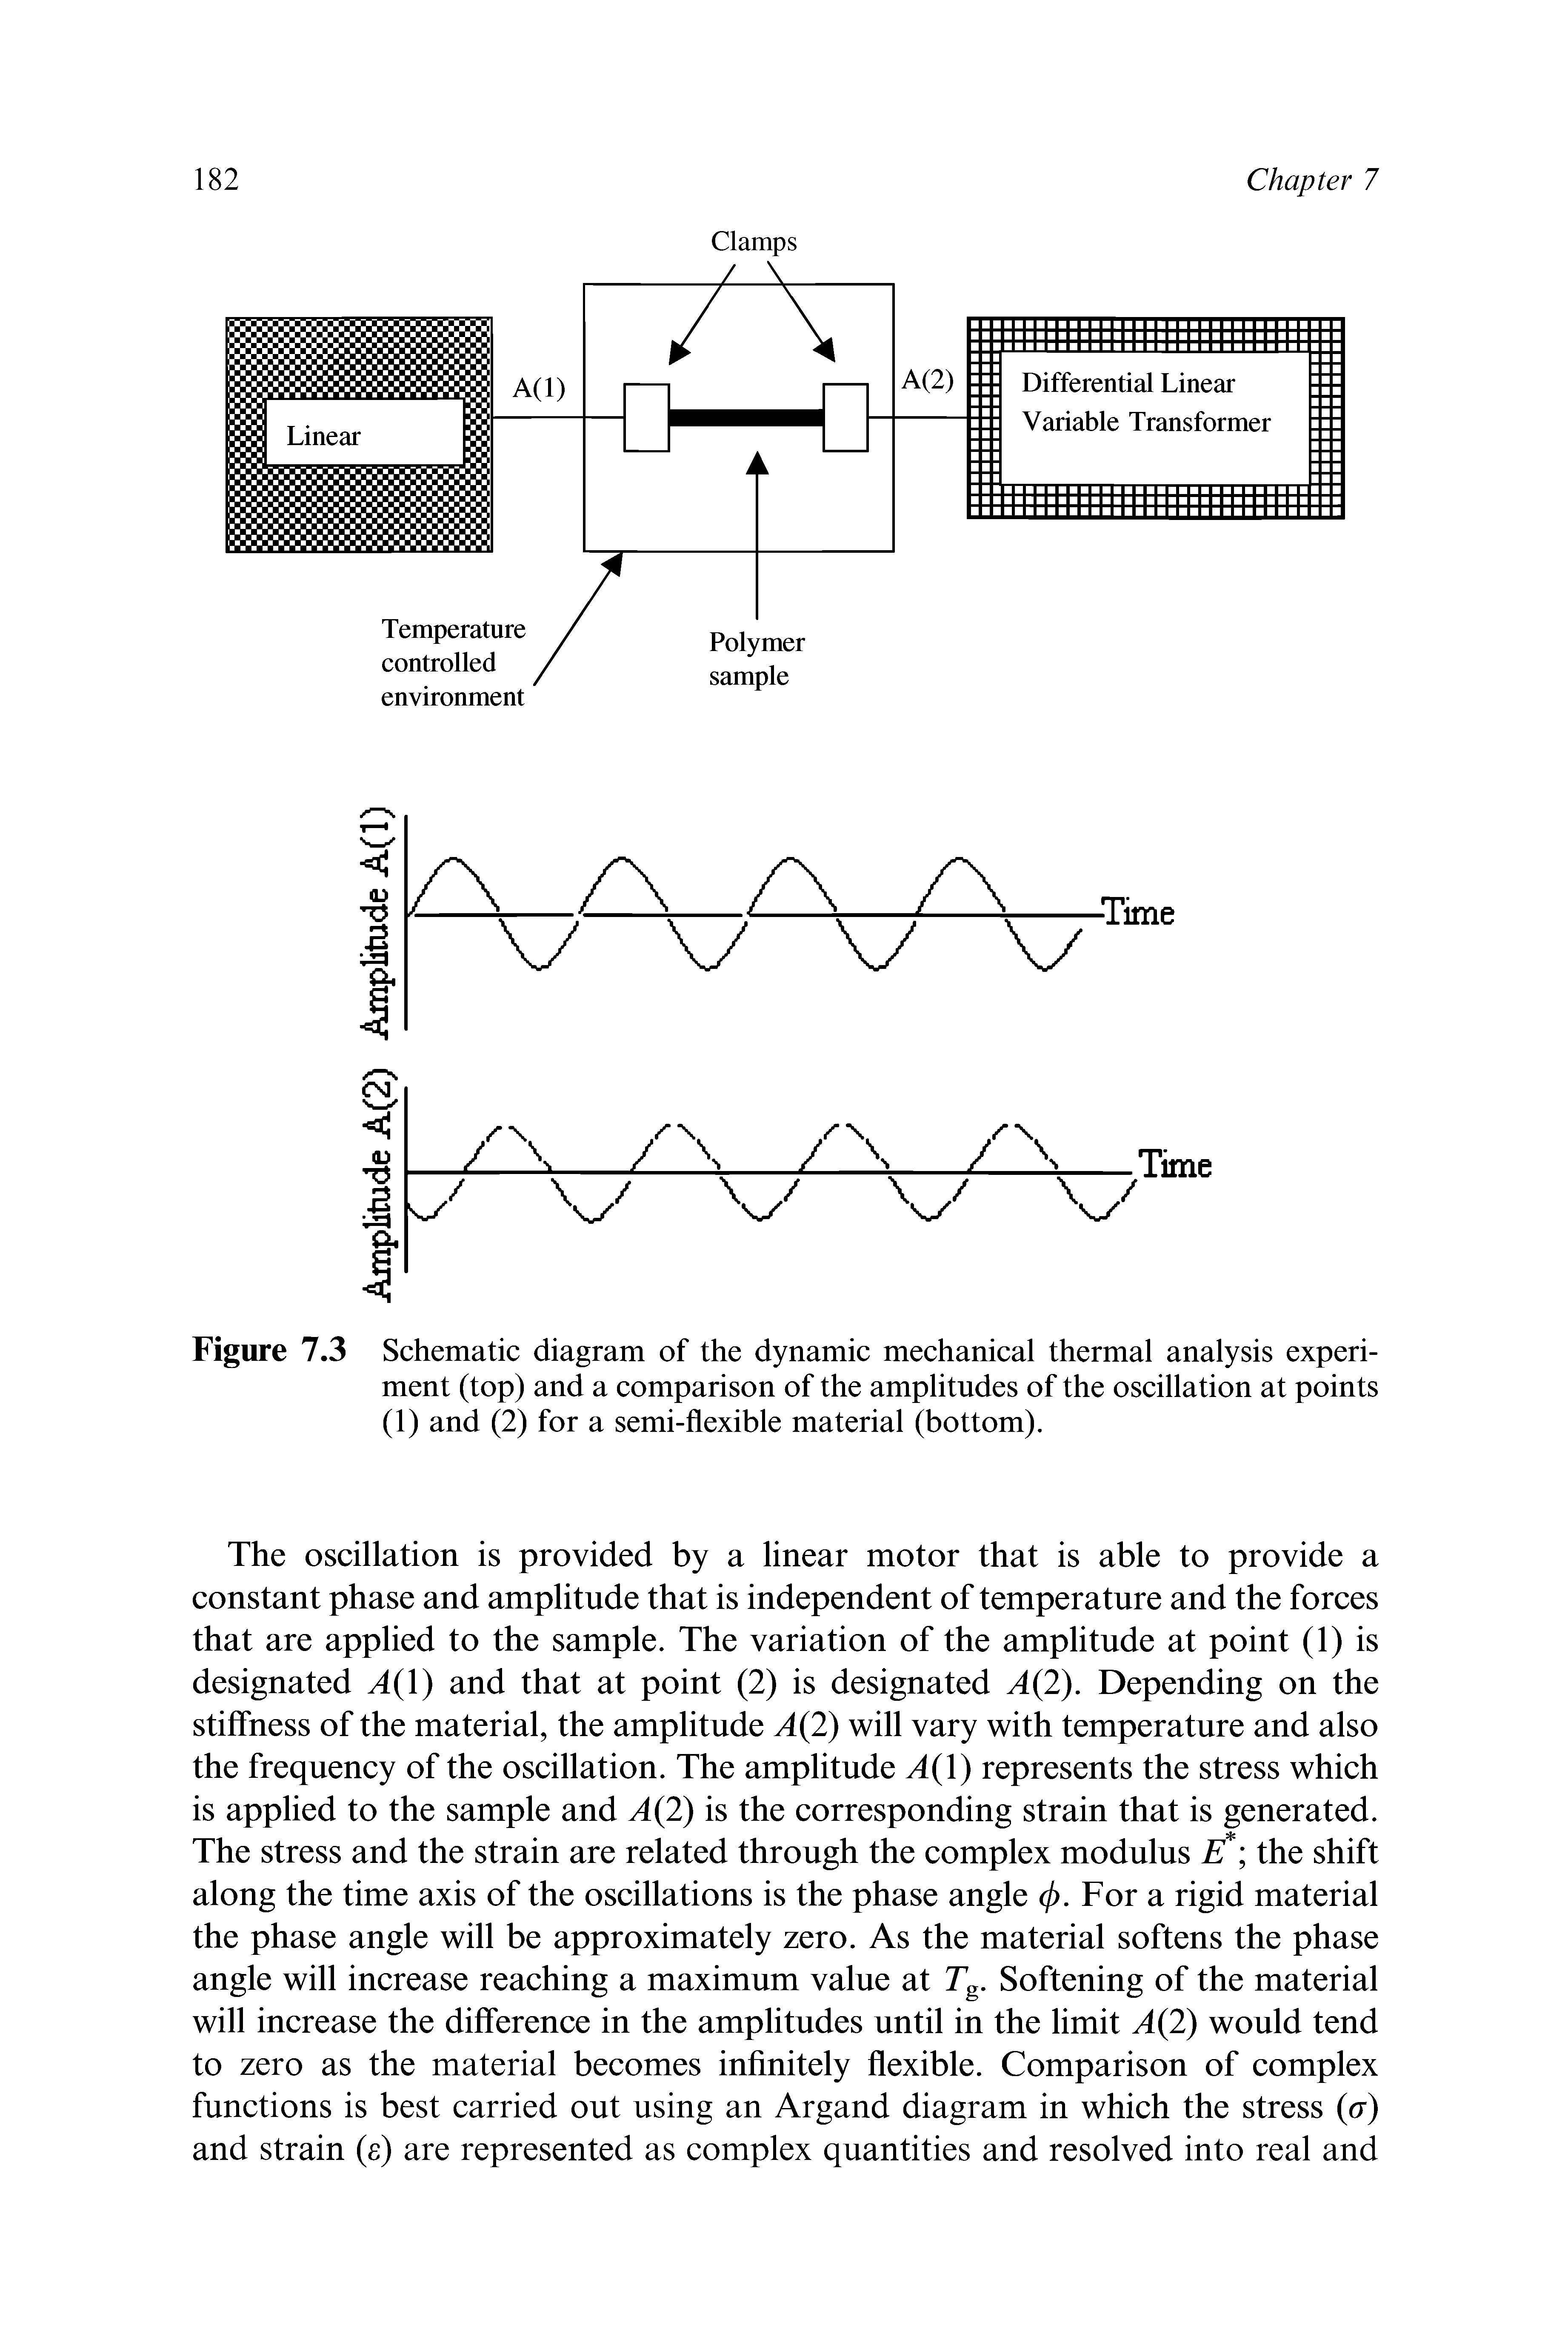 Figure 7.3 Schematic diagram of the dynamic mechanical thermal analysis experiment (top) and a comparison of the amplitudes of the oscillation at points (1) and (2) for a semi-flexible material (bottom).